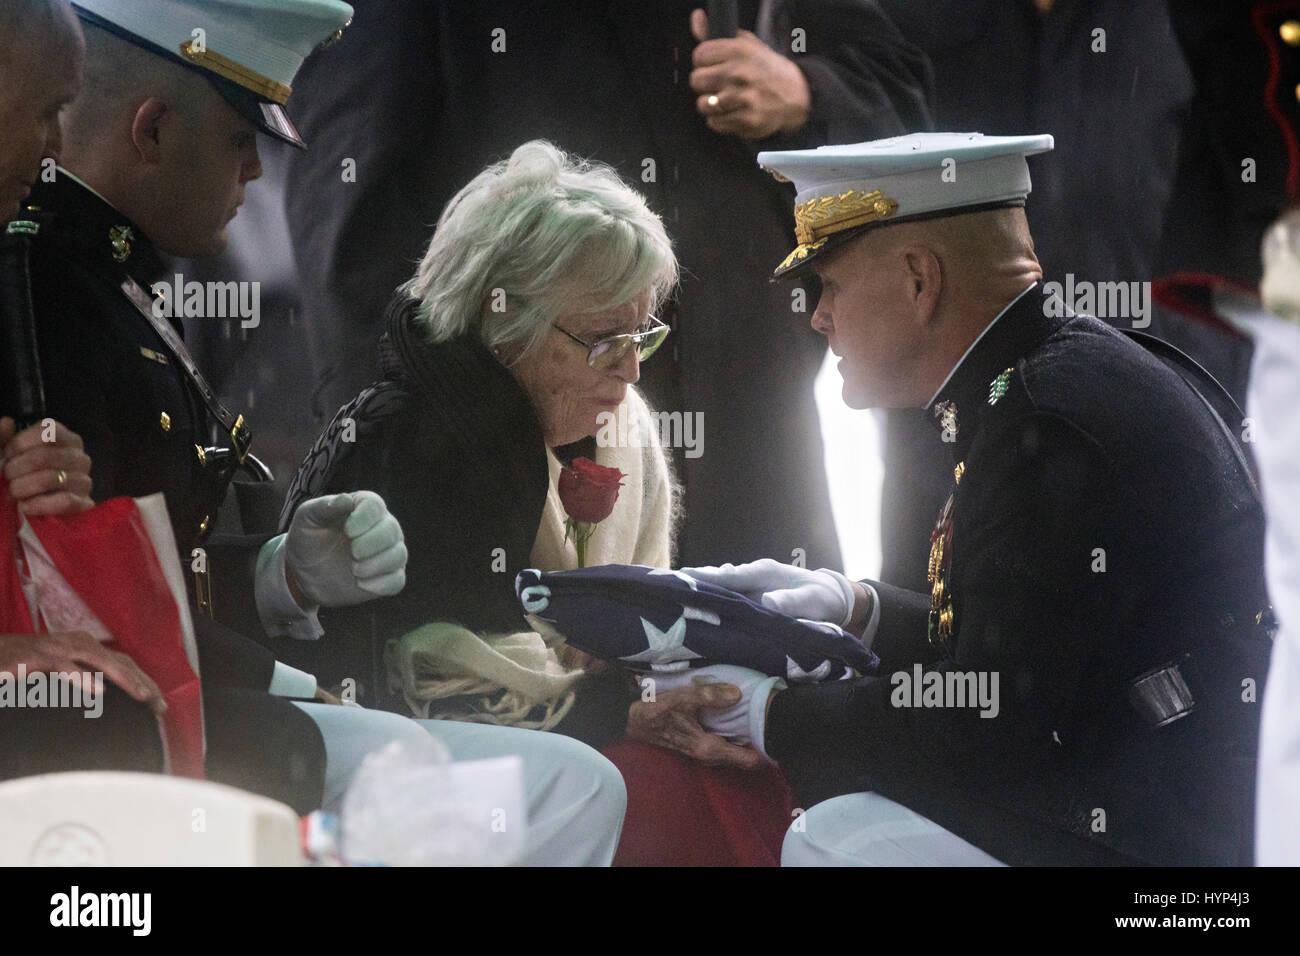 Arlington, United States Of America. 06th Apr, 2017. Commandant of the Marine Corps Gen. Robert Neller, right, presents the flag to Anne Glenn, widow of John Glenn, during the graveside service in Section 35 of Arlington National Cemetery April 6, 2017 in Arlington, Virginia. Glenn, the first American astronaut to orbit the Earth and later a United States senator, died at the age of 95 on December 8, 2016. Credit: Planetpix/Alamy Live News Stock Photo